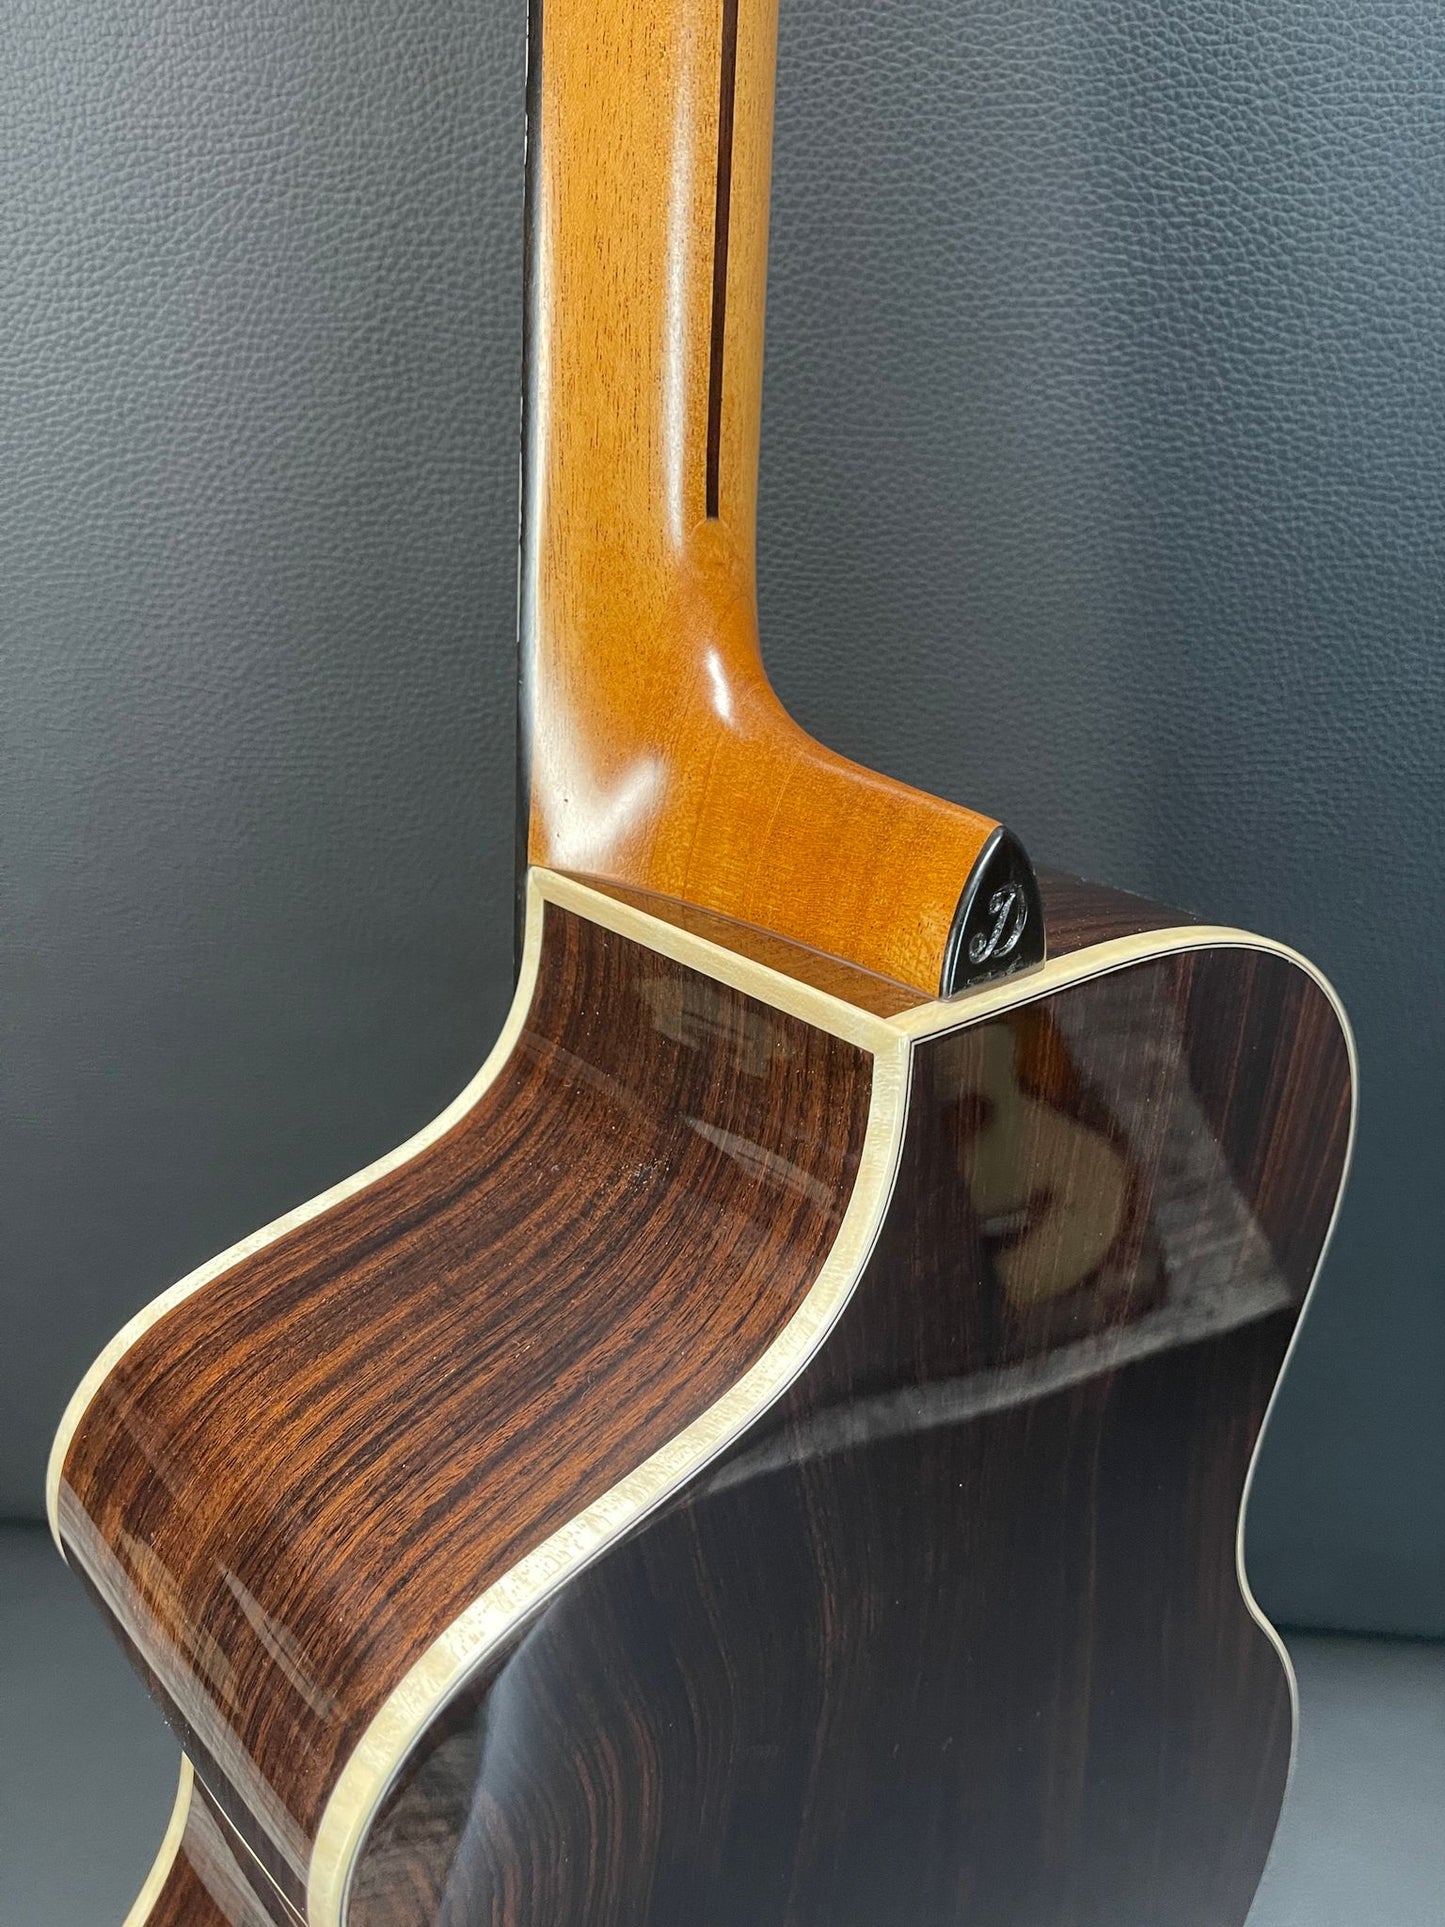 Dowina Rosewood Deluxe GACE - DS #2210002